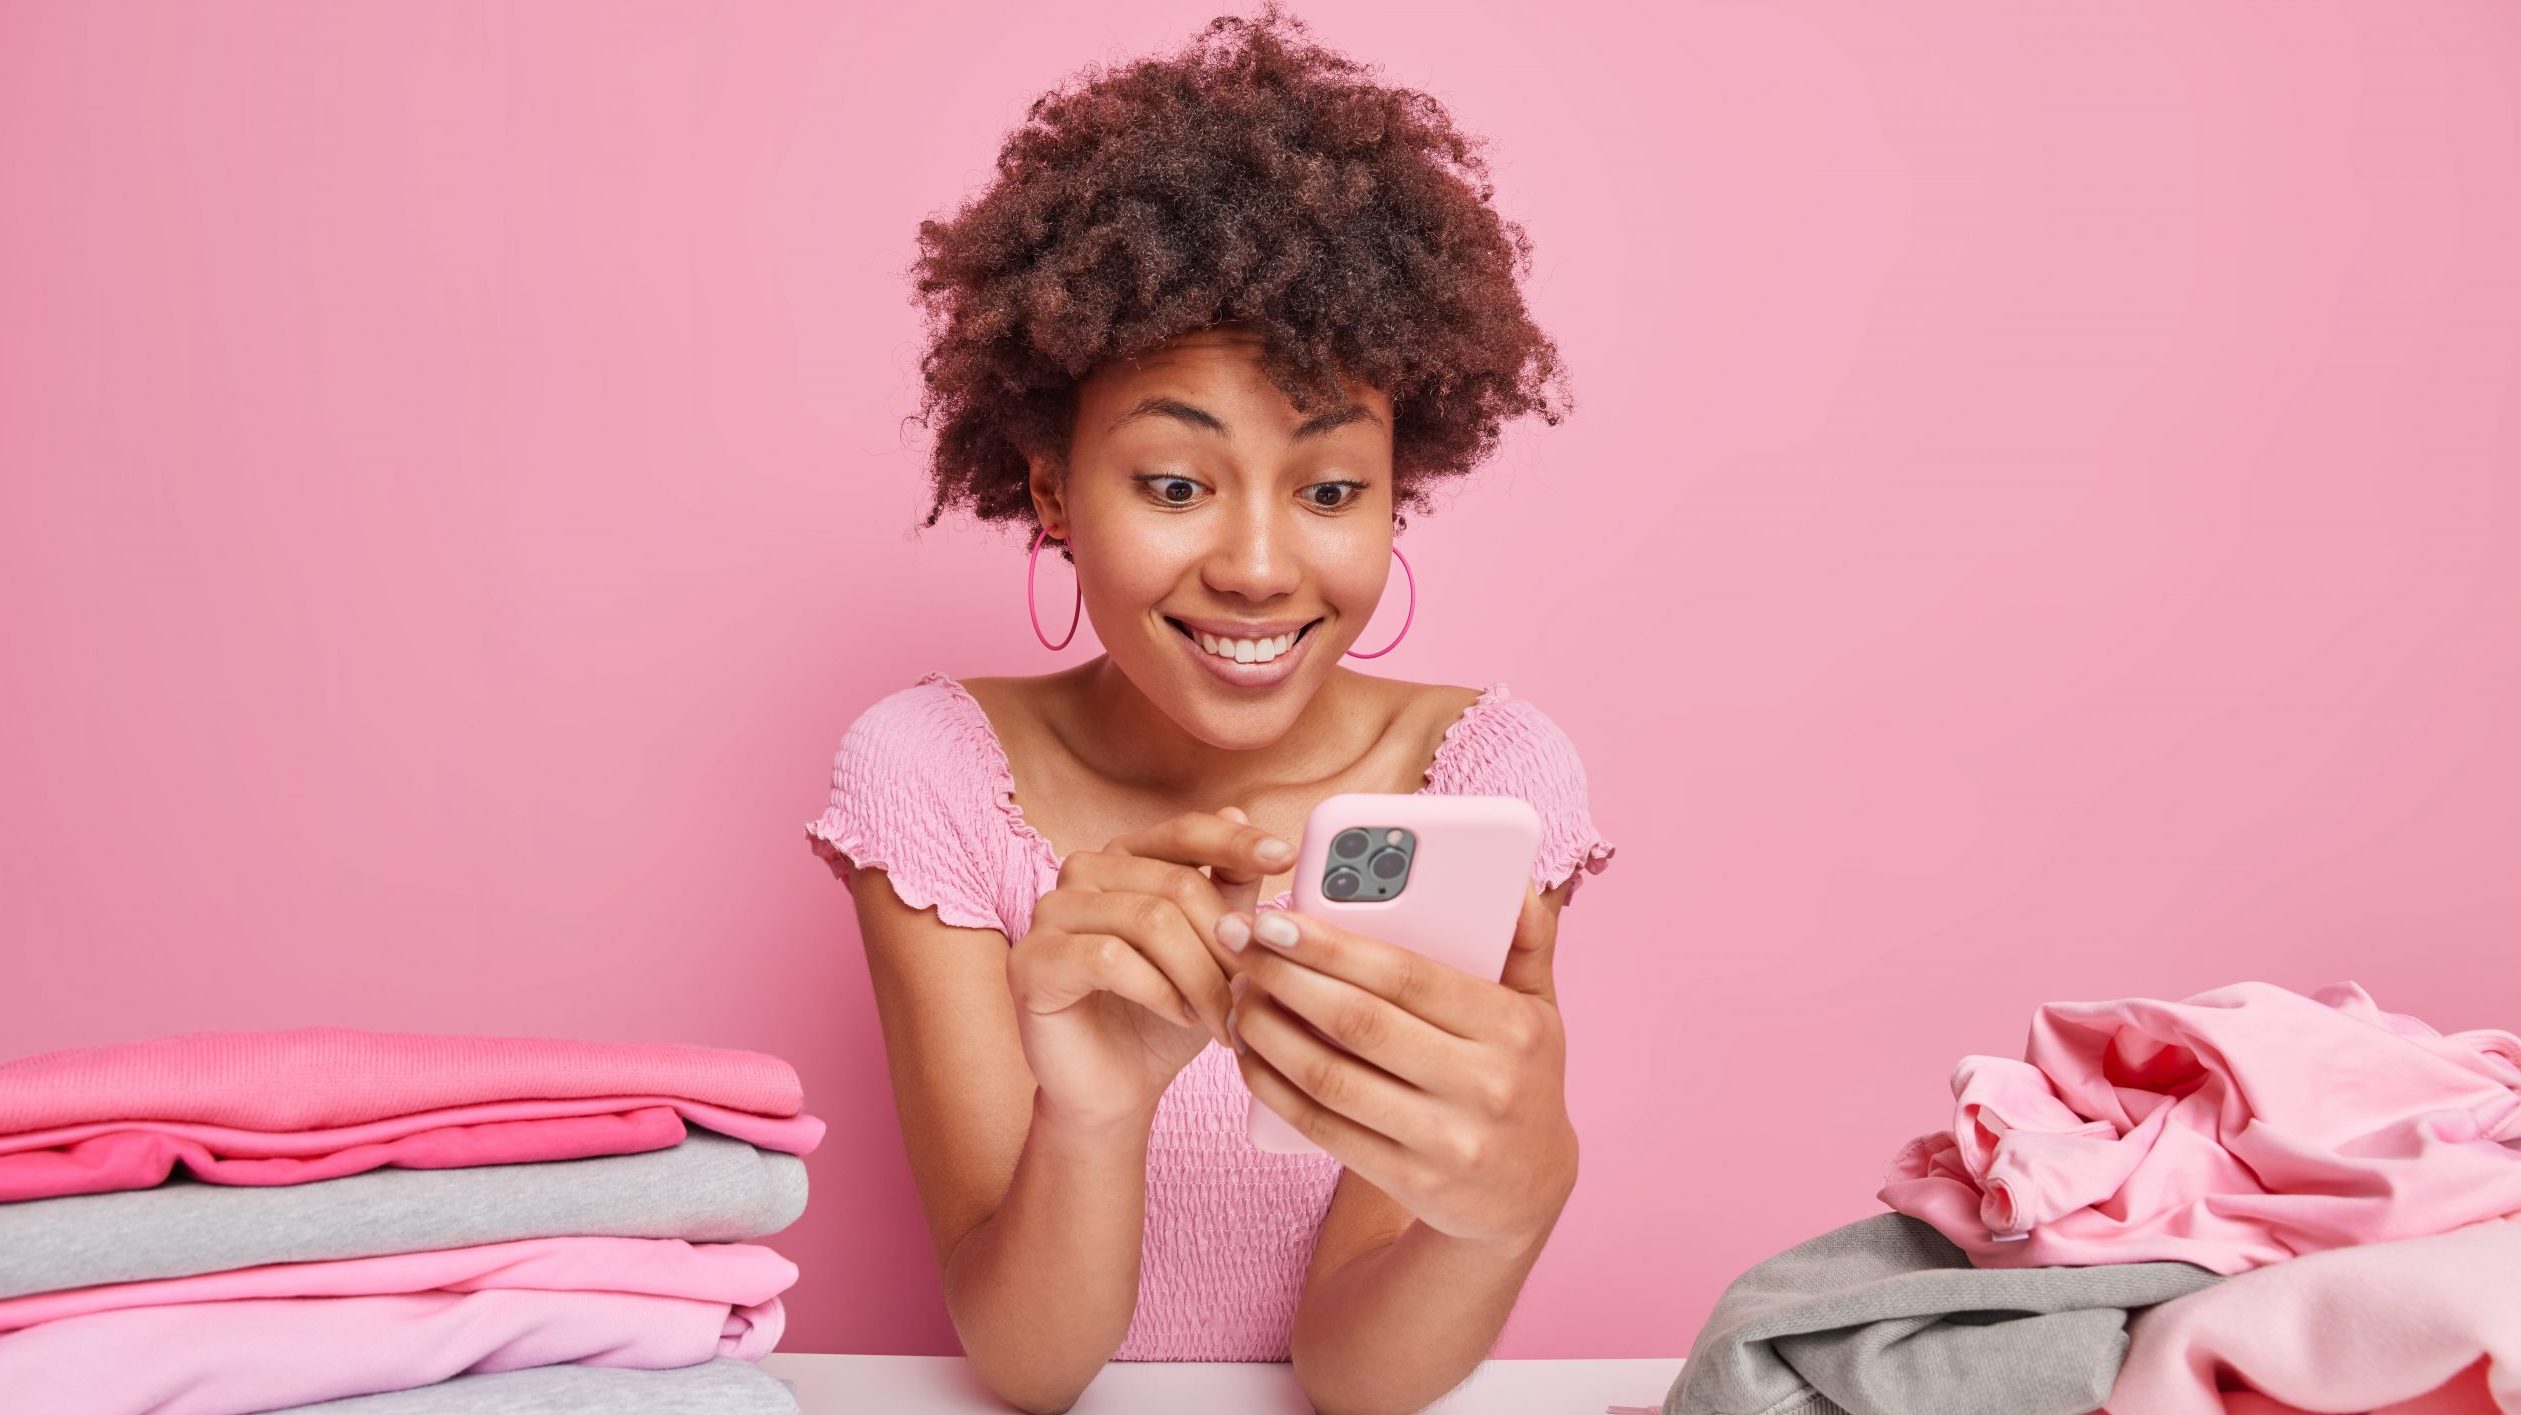 Happy woman looks at phone while doing laundry